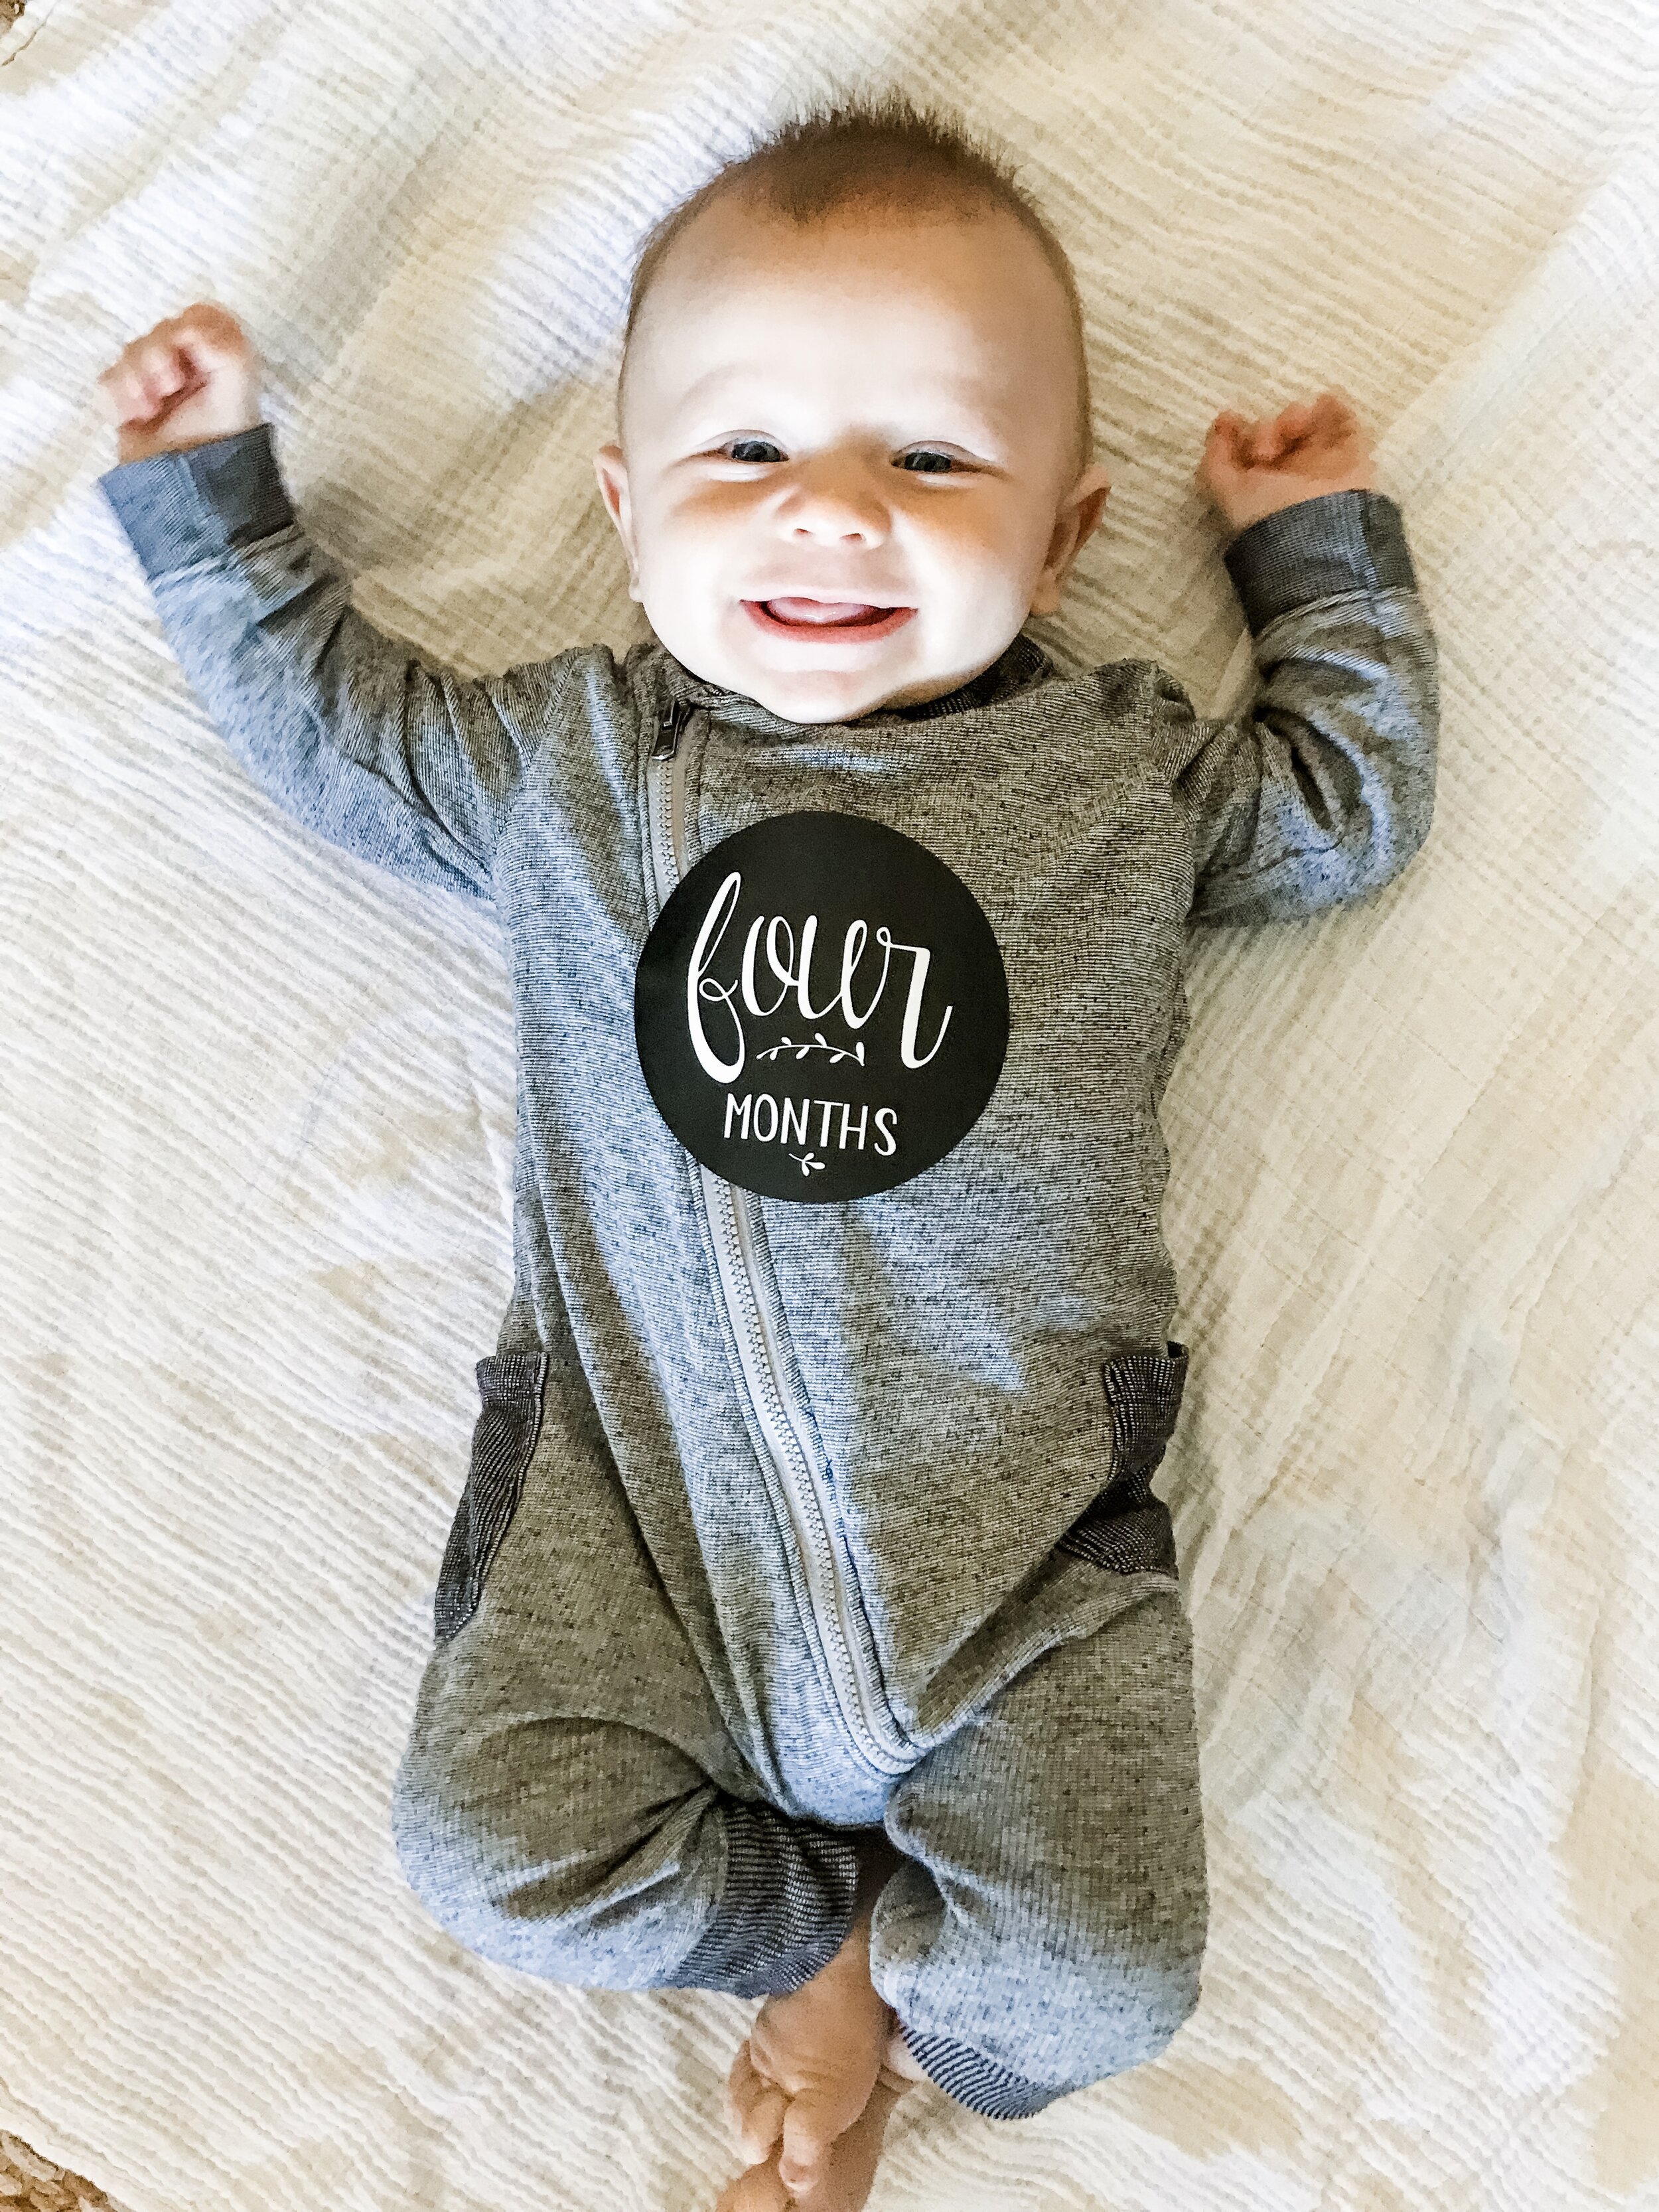 Dear Smith, You Are 4 Months Old! — Ashley Wiseman